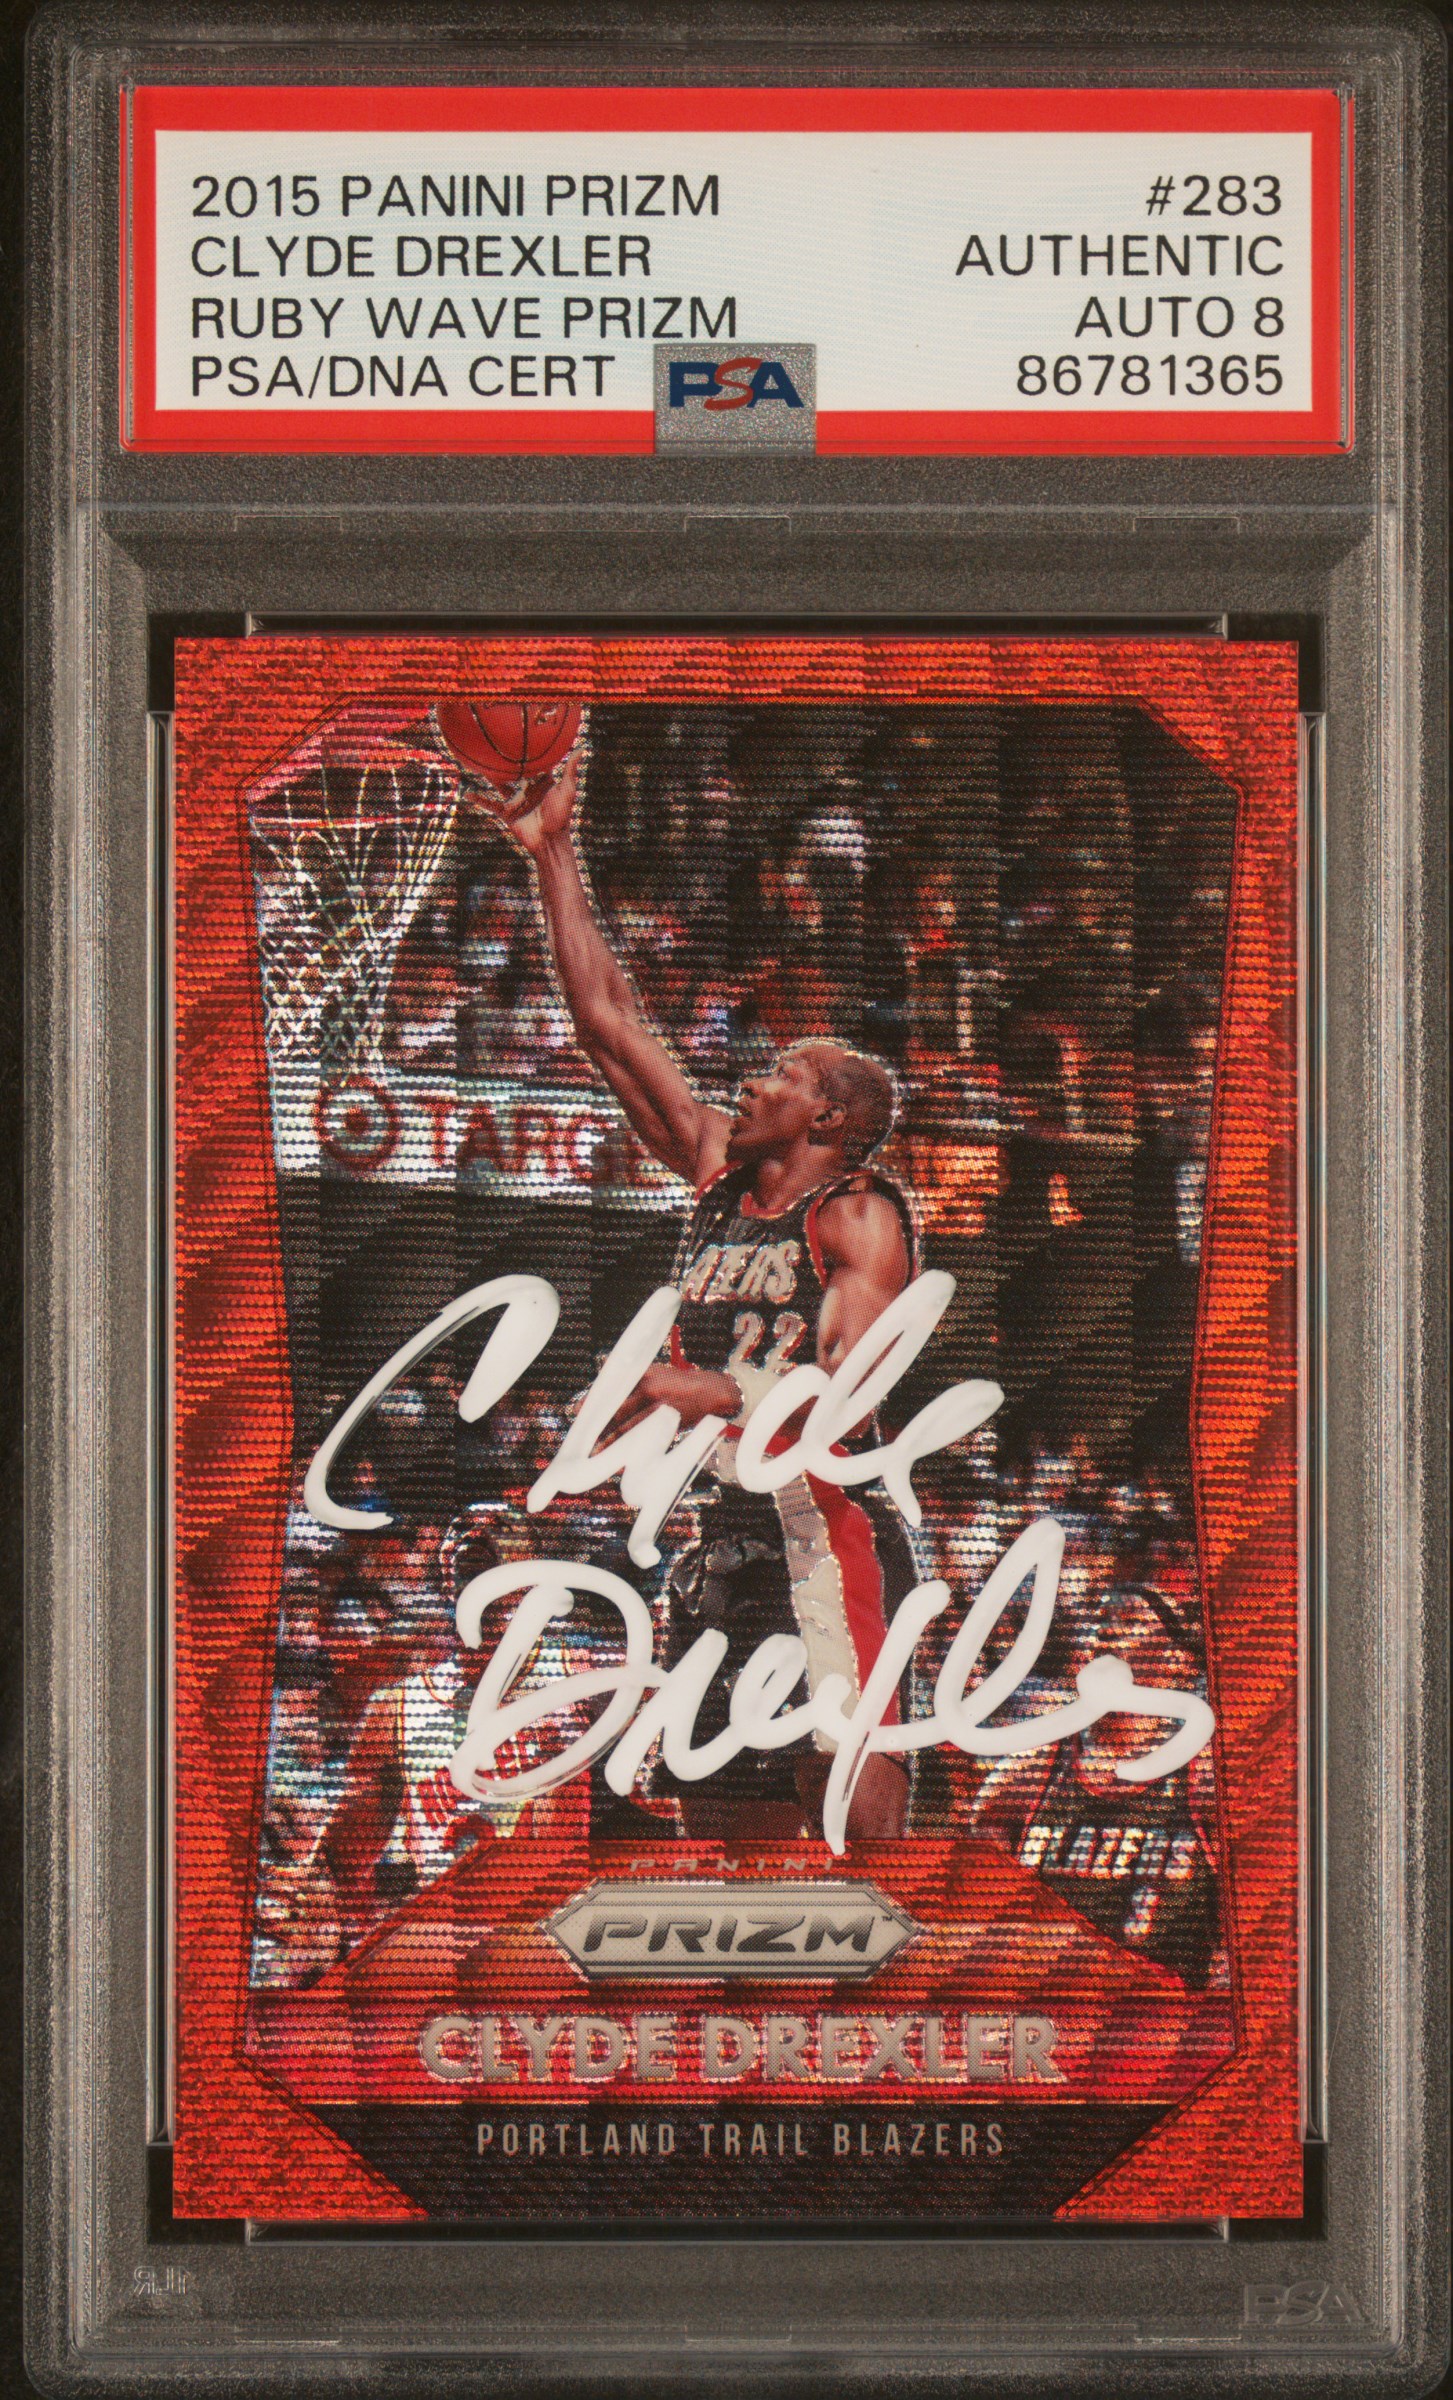 Clyde Drexler 2015 Panini Prizm Ruby Wave Red Card #283 Auto PSA 8 143/350